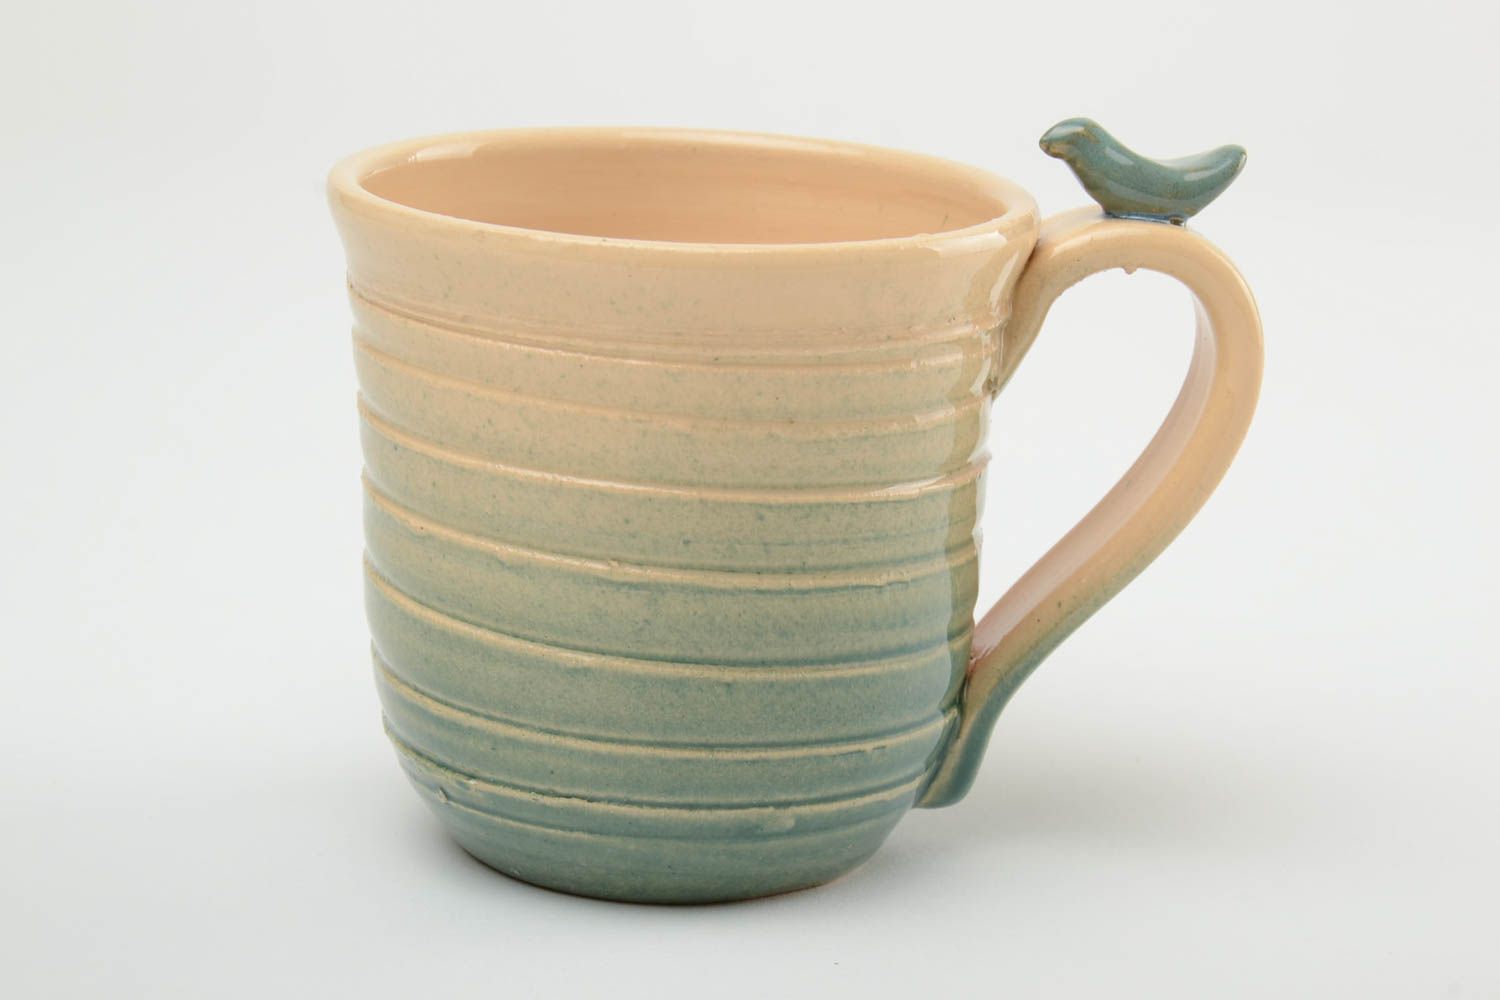 10 oz porcelain ceramic drinking cup in yellow and light blue color with handle. Great gift for a girl.  photo 3